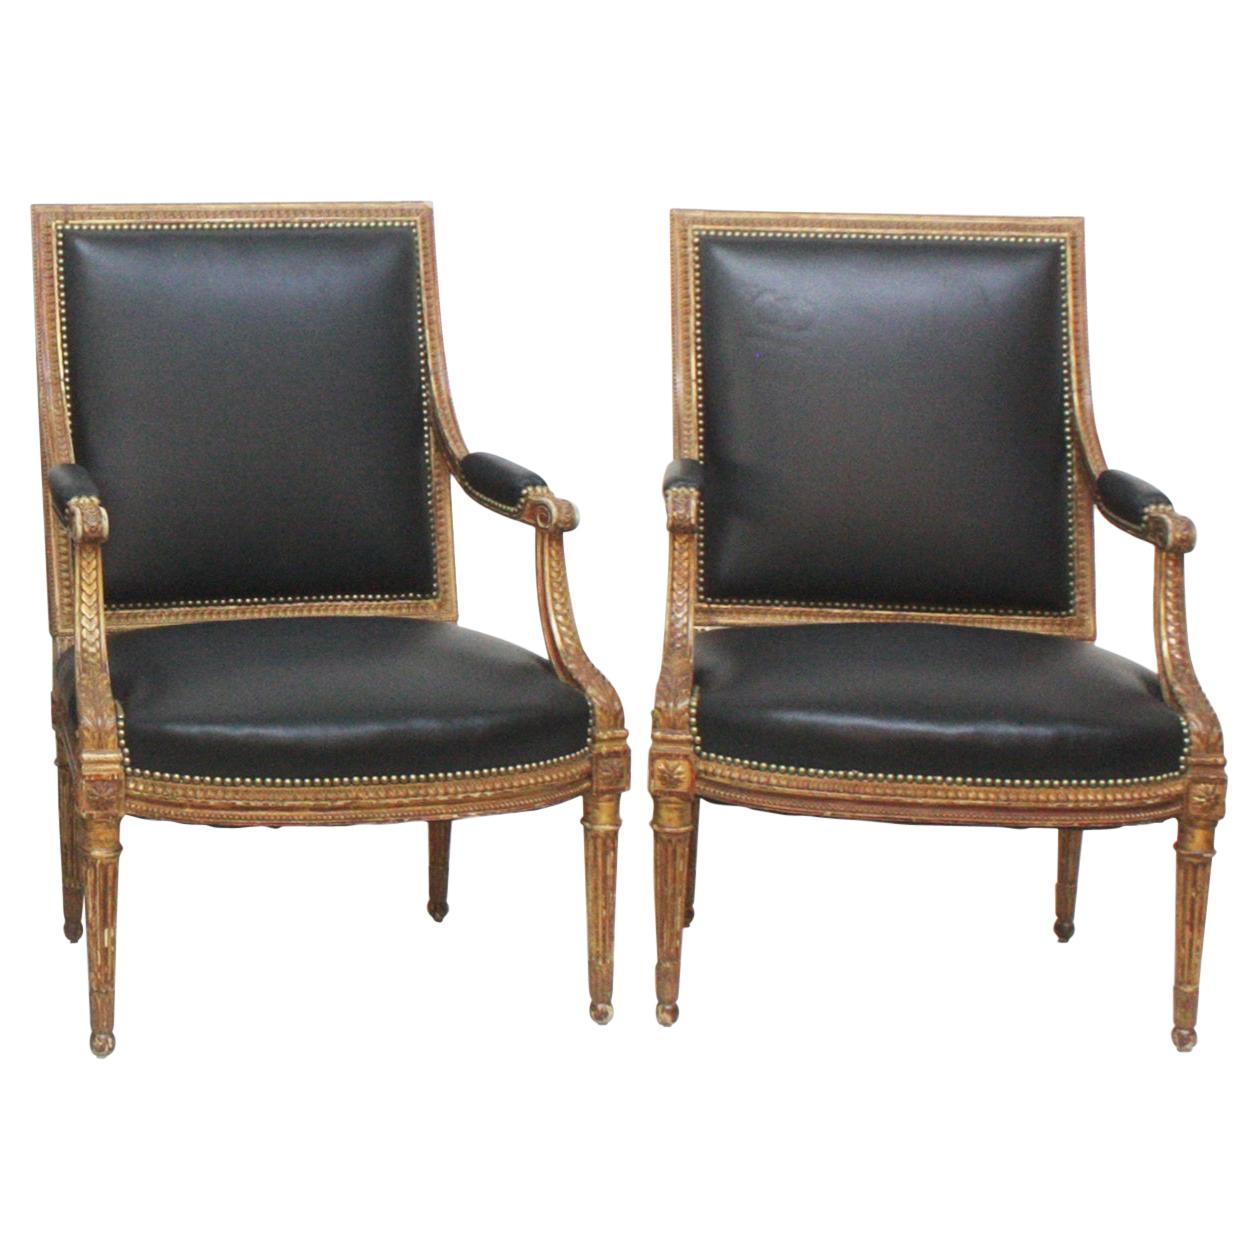 Louis XVI-Style Giltwood Fauteuils / Armchairs